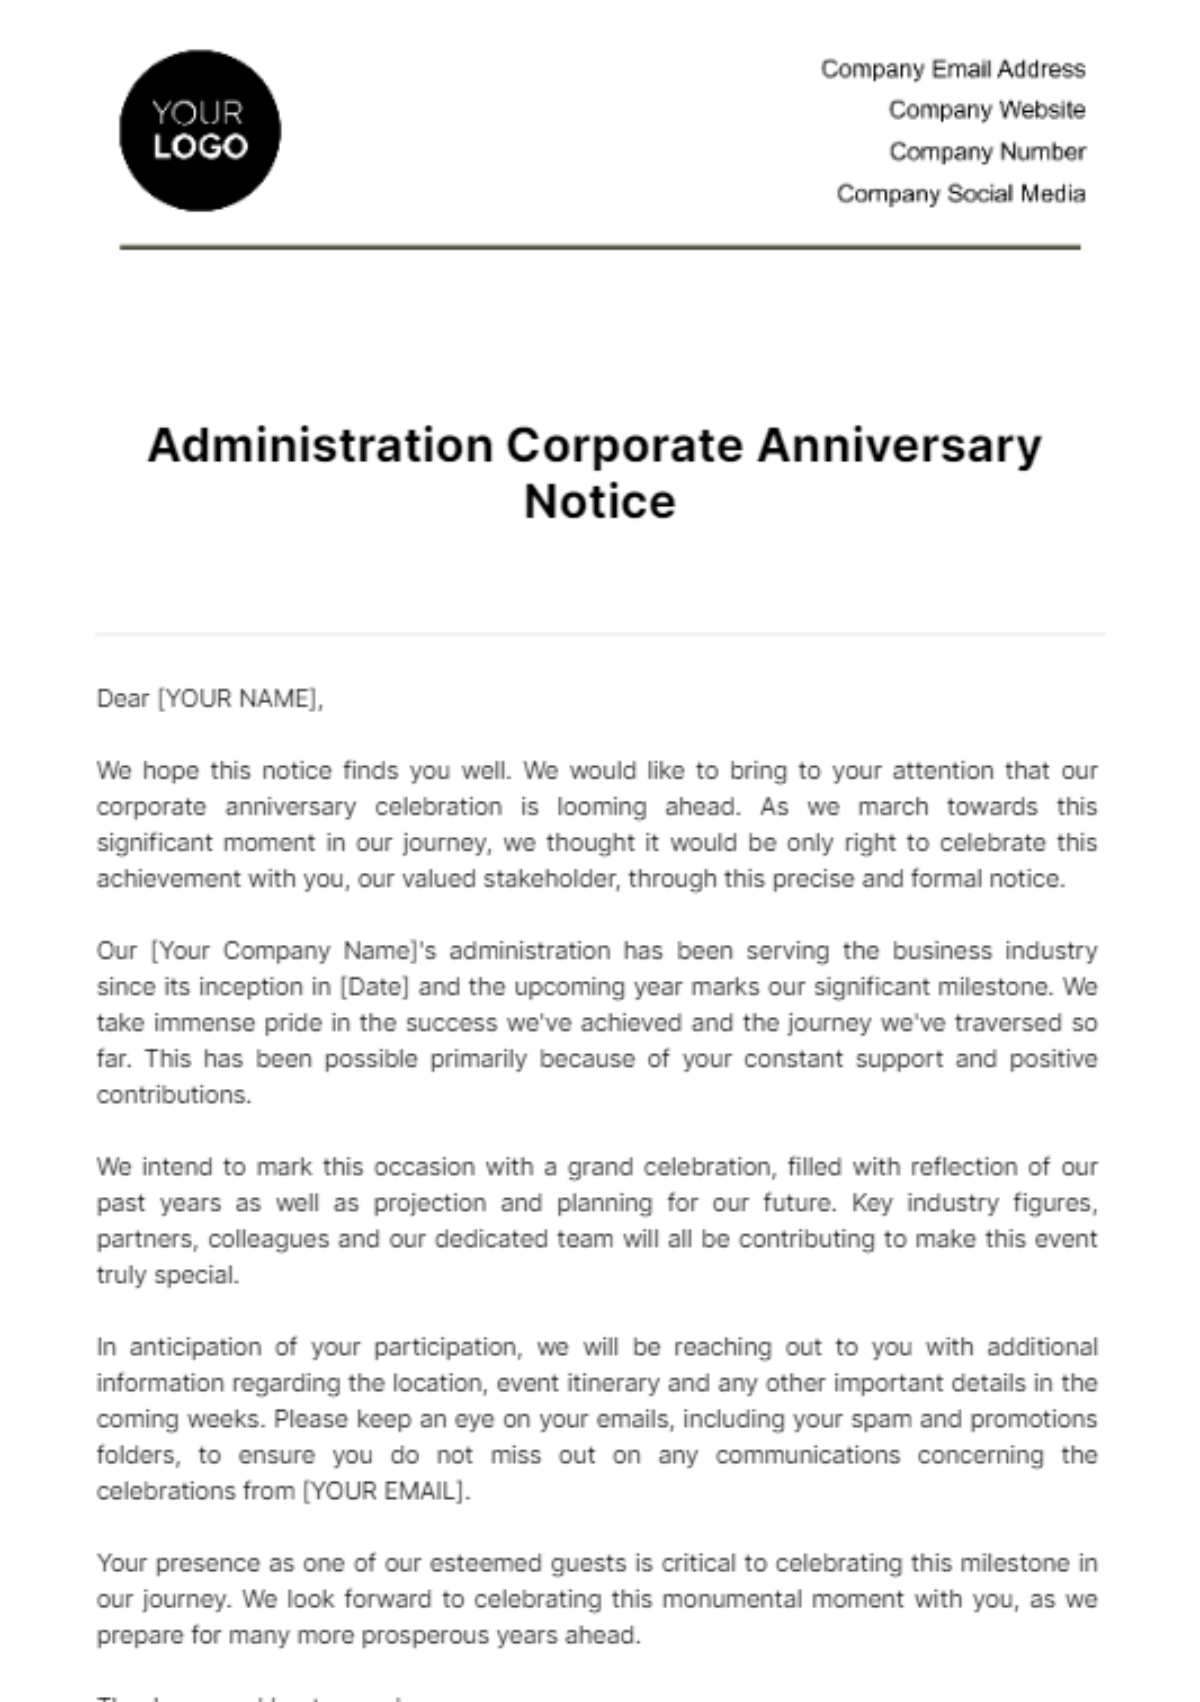 Administration Corporate Anniversary Notice Template